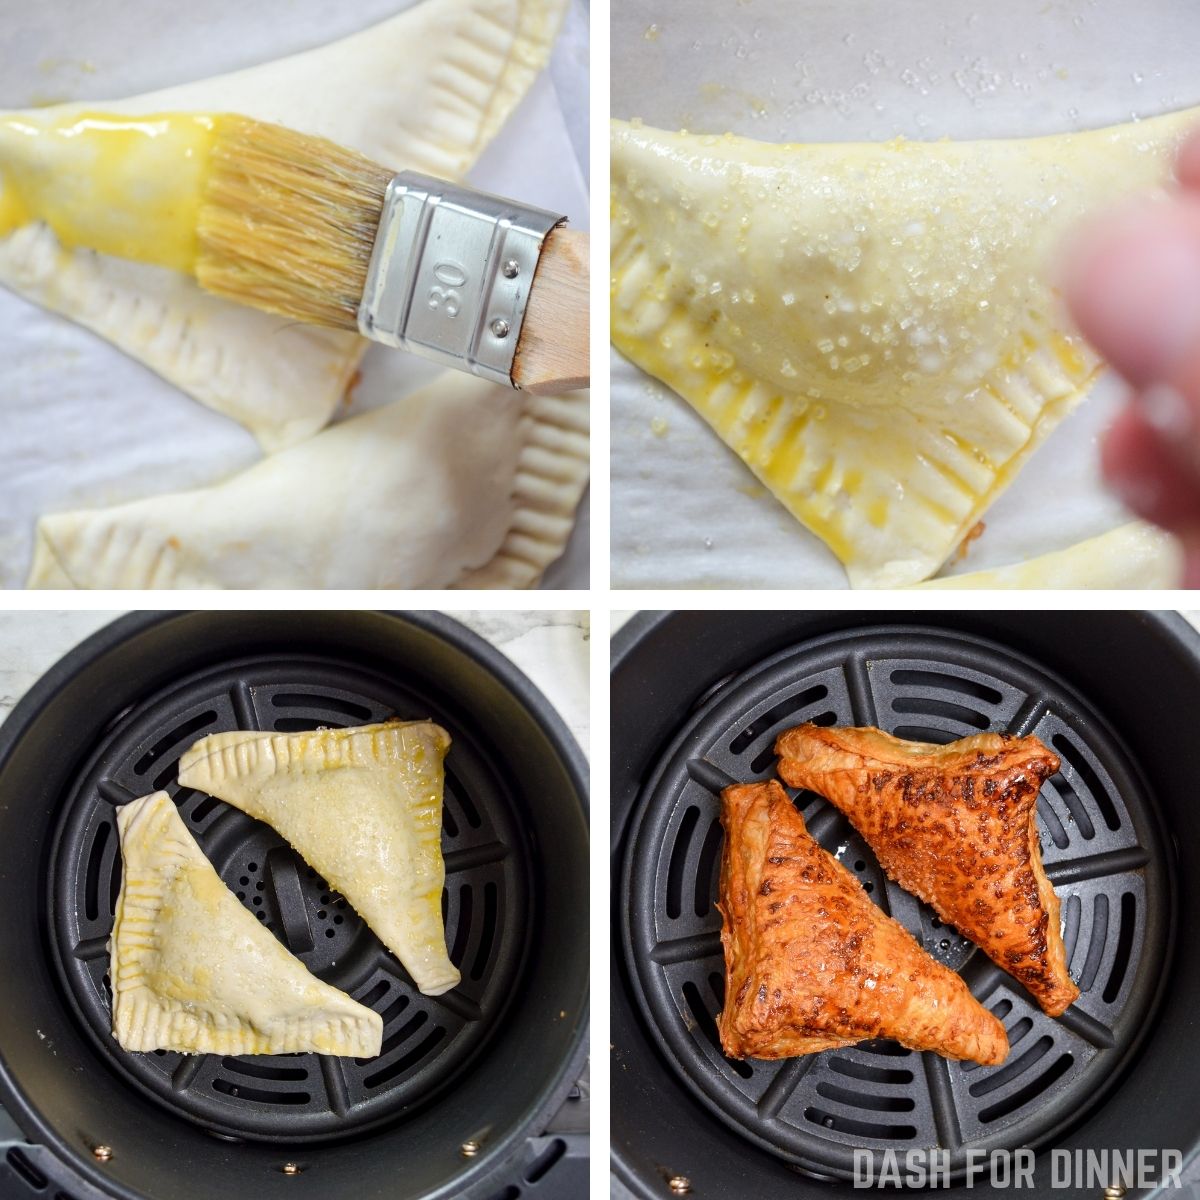 How to make apple turnovers in an air fryer. Add the sealed turnovers to the basket of an air fryer and bake until golden.